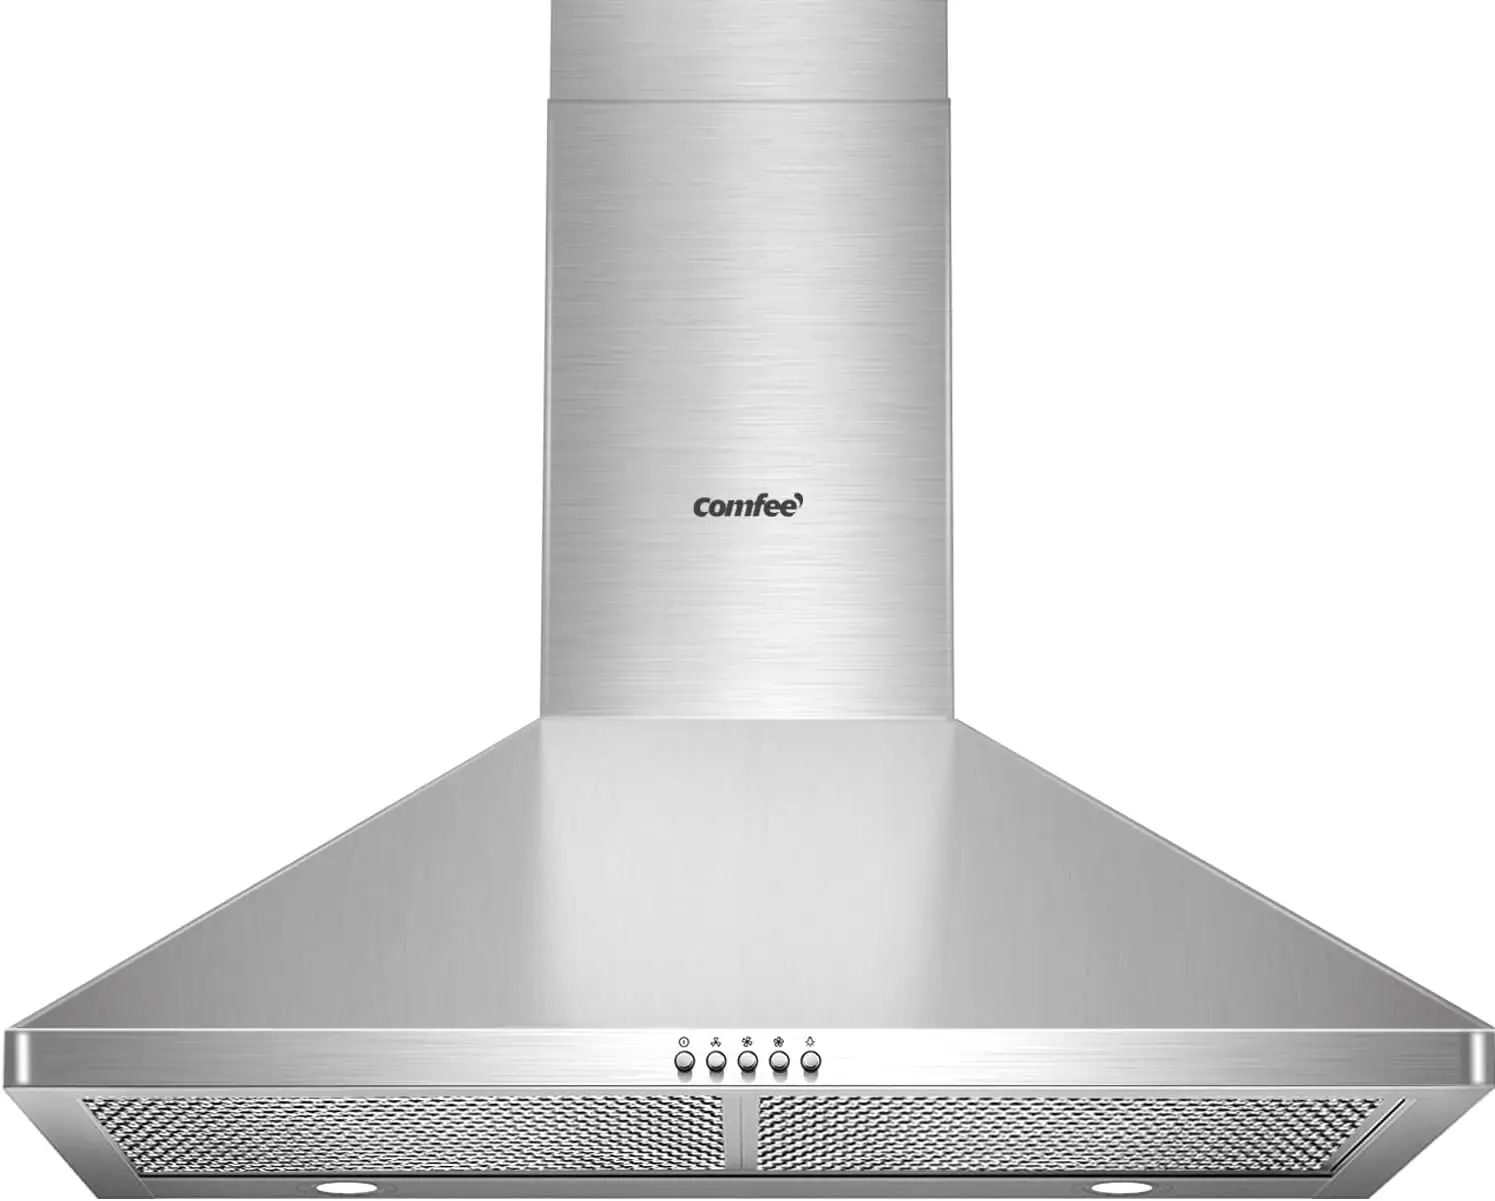 

Ducted Pyramid Range 450 CFM Stainless Steel Wall Mount Vent Hood with 3 Speed Exhaust Fan, 5-Layer Aluminum Permanent Filters